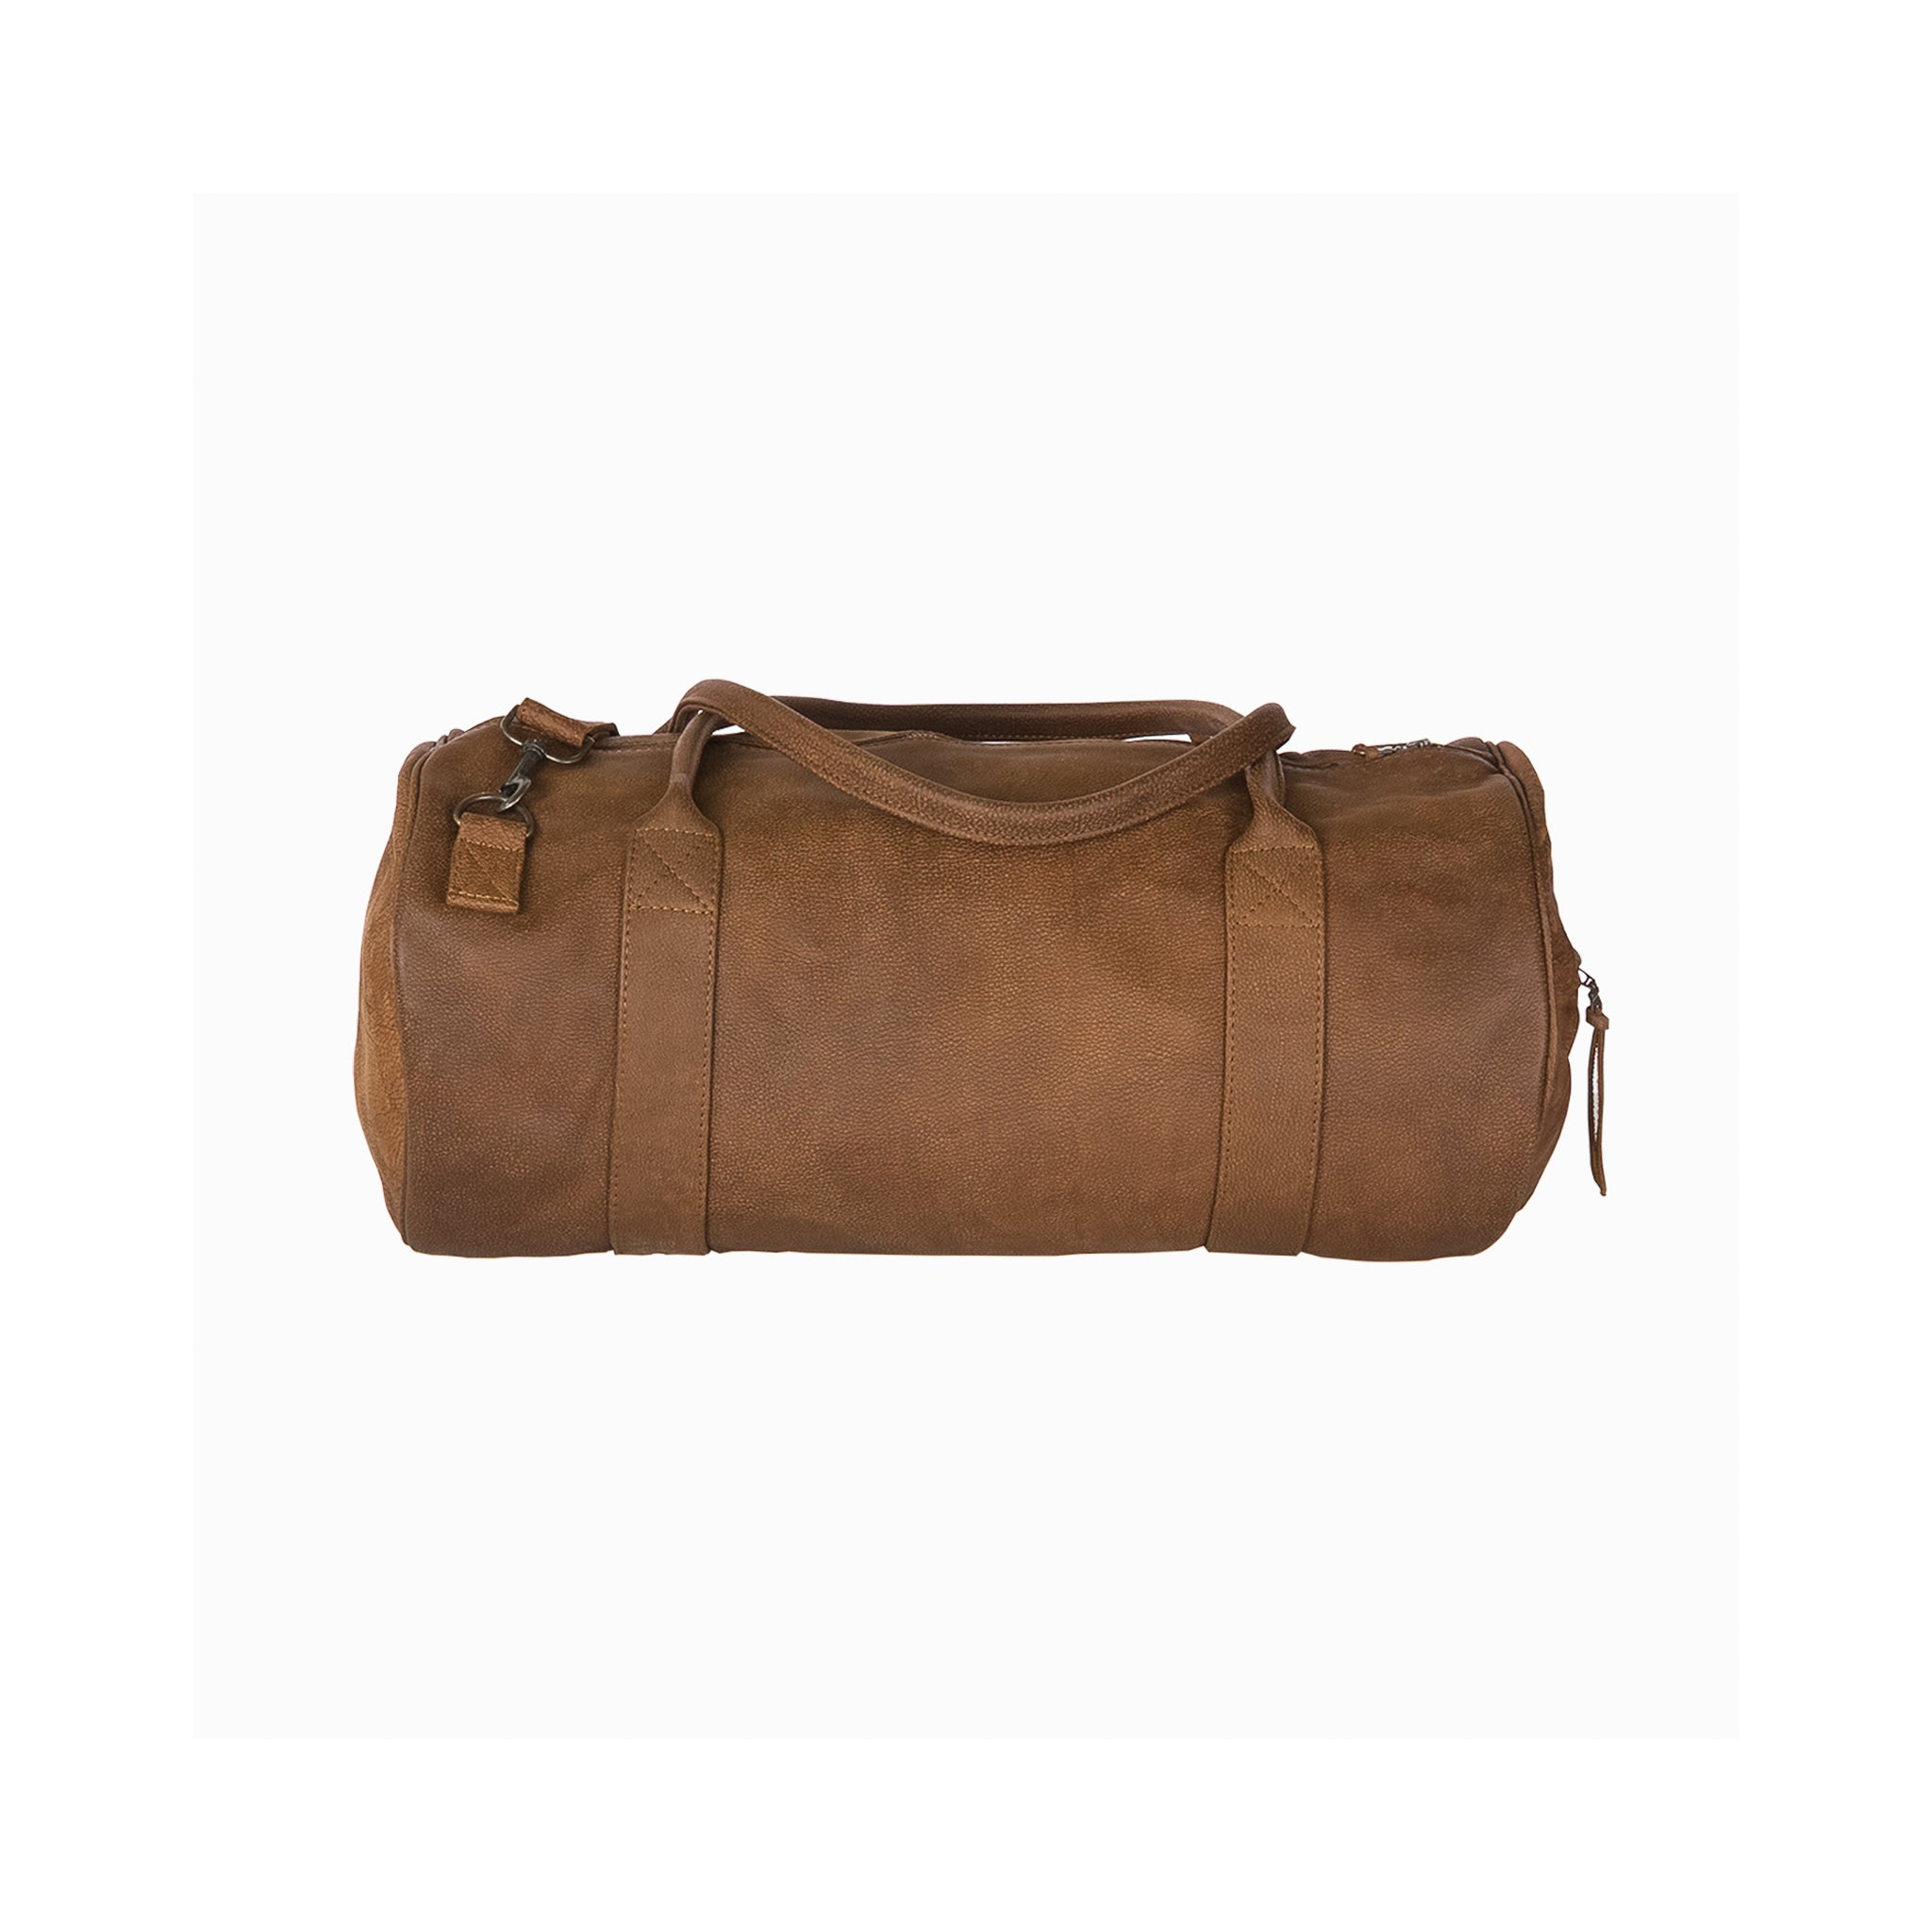 ARIAT Heavy Duty Quality Canvas Leather Rolling Duffle Bag